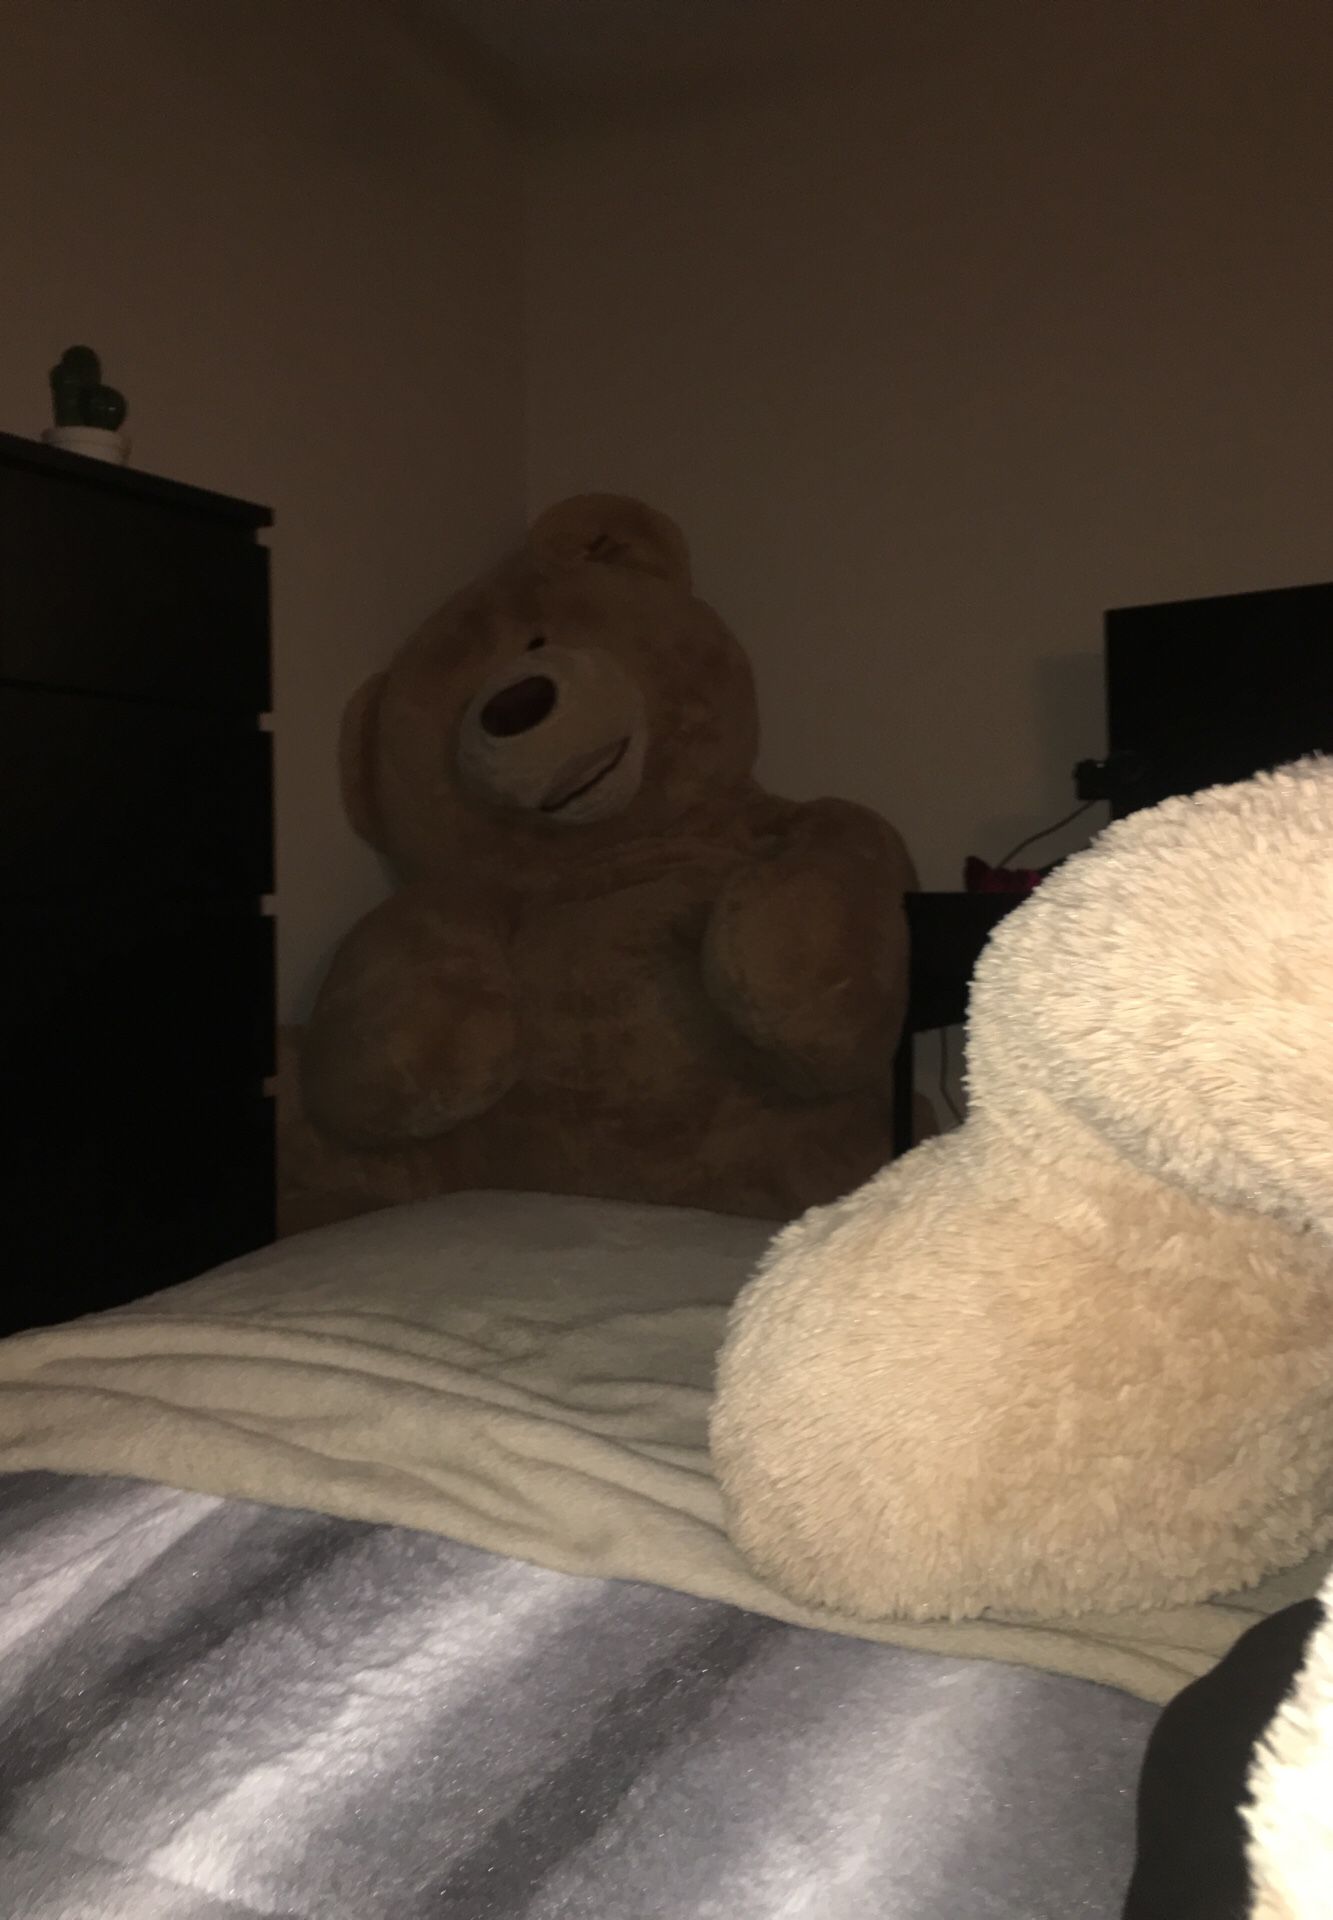 8 Foot 93 Inch Giant Stuffed Teddy Bear Costco Special for Sale in